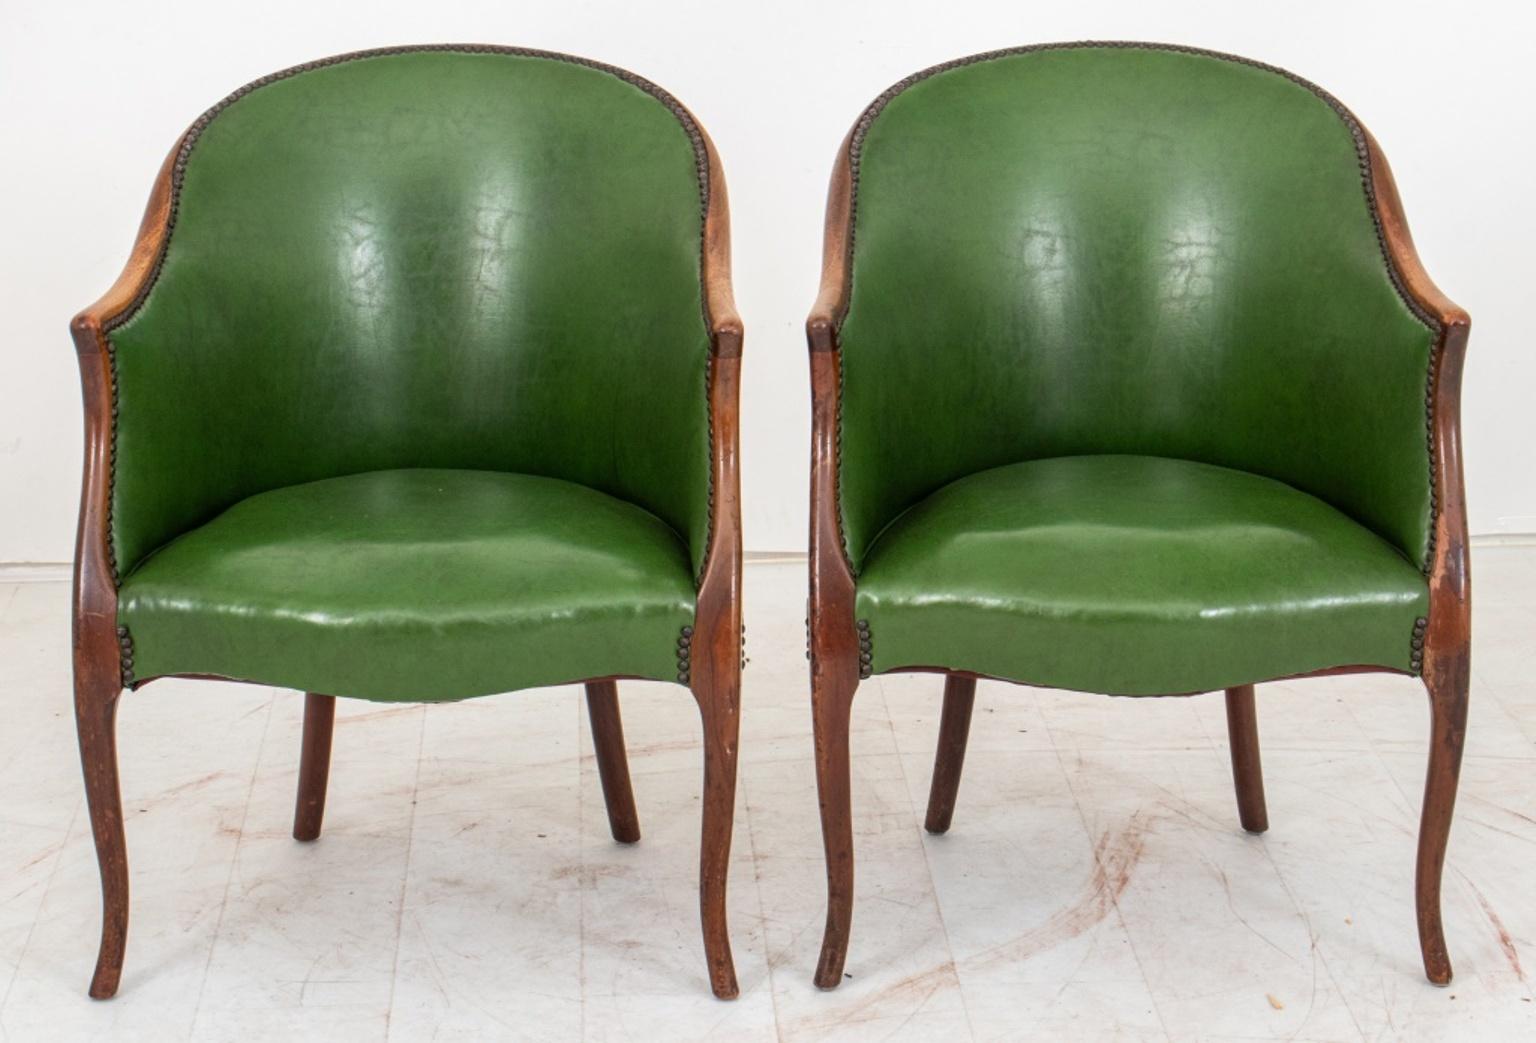 George III Style Leather Upholstered Games Chairs, each with barrel backs with nailhead-decorated green leather upholstery, down swept arms and splay feet. 

Dimensions: 33